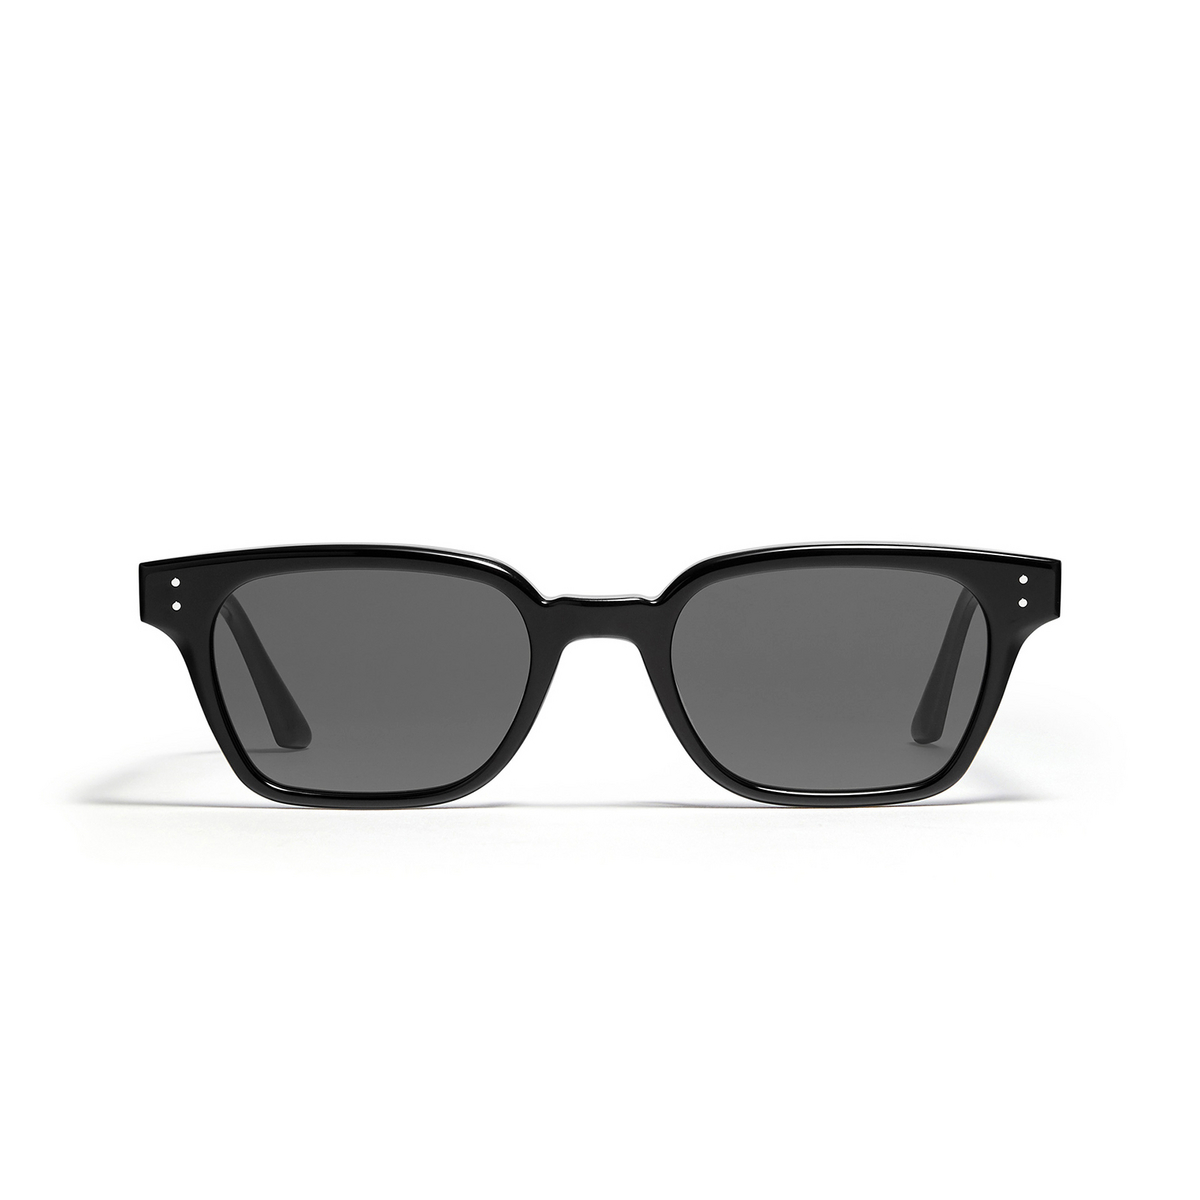 Gentle Monster ROUDY Sunglasses 01 Black - front view